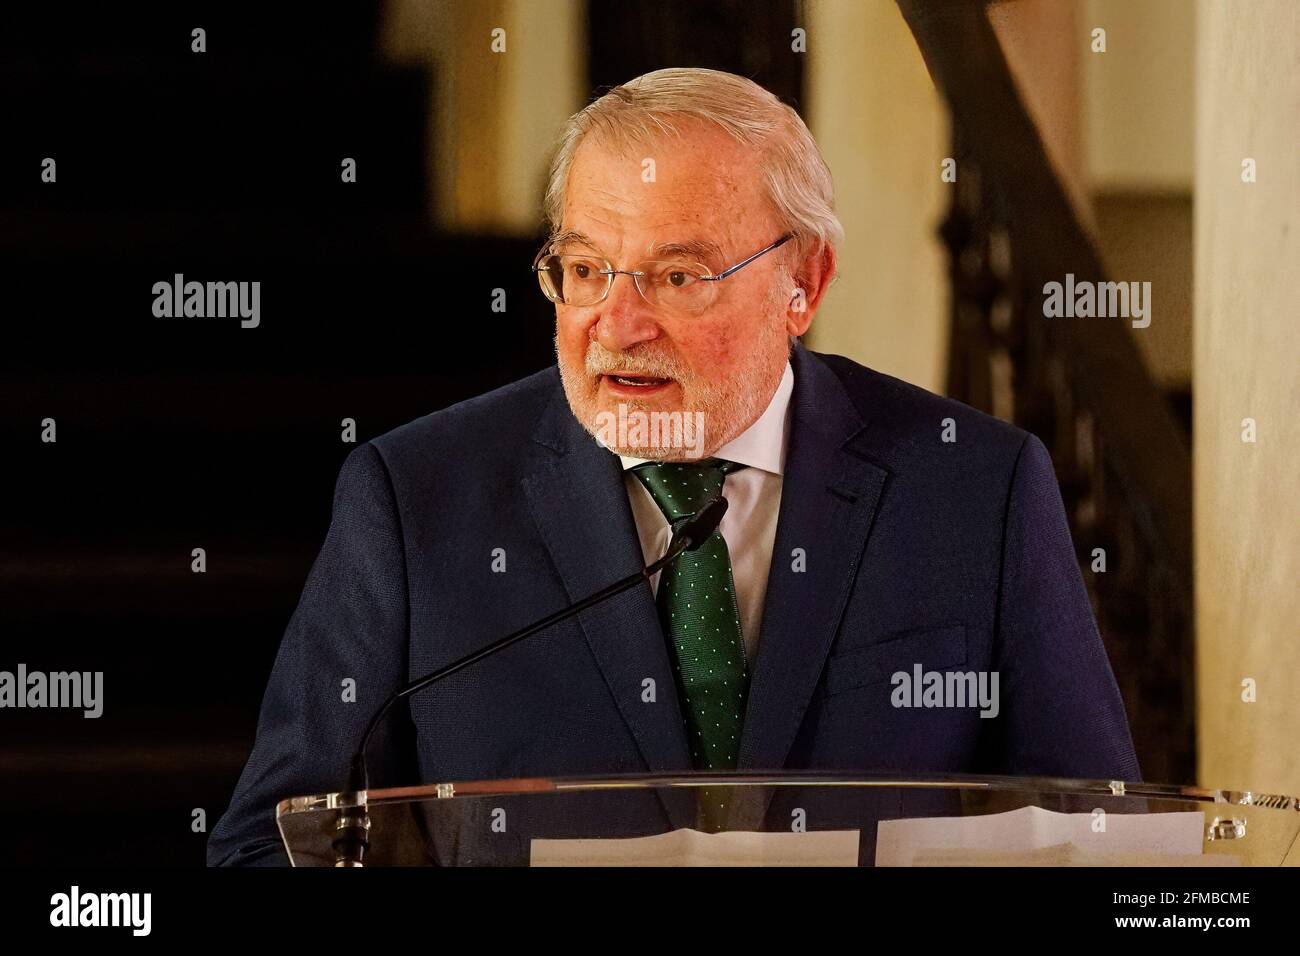 Malaga, Spain. 07th May, 2021. President of Unicaja, Manuel Azuaga speaking during the exhibition at Centro Cultural Fundacion Unicaja. 'Un siglo de esplendor' is an exhibition that shows the artistic heritage of the Holy Week brotherhoods of Malaga and is one of the events organized by Agrupacion de Cofradias de Semana Santa de Malaga for the centenary of the institution. (Photo by Francis Gonzalez/SOPA Images/Sipa USA) Credit: Sipa USA/Alamy Live News Stock Photo